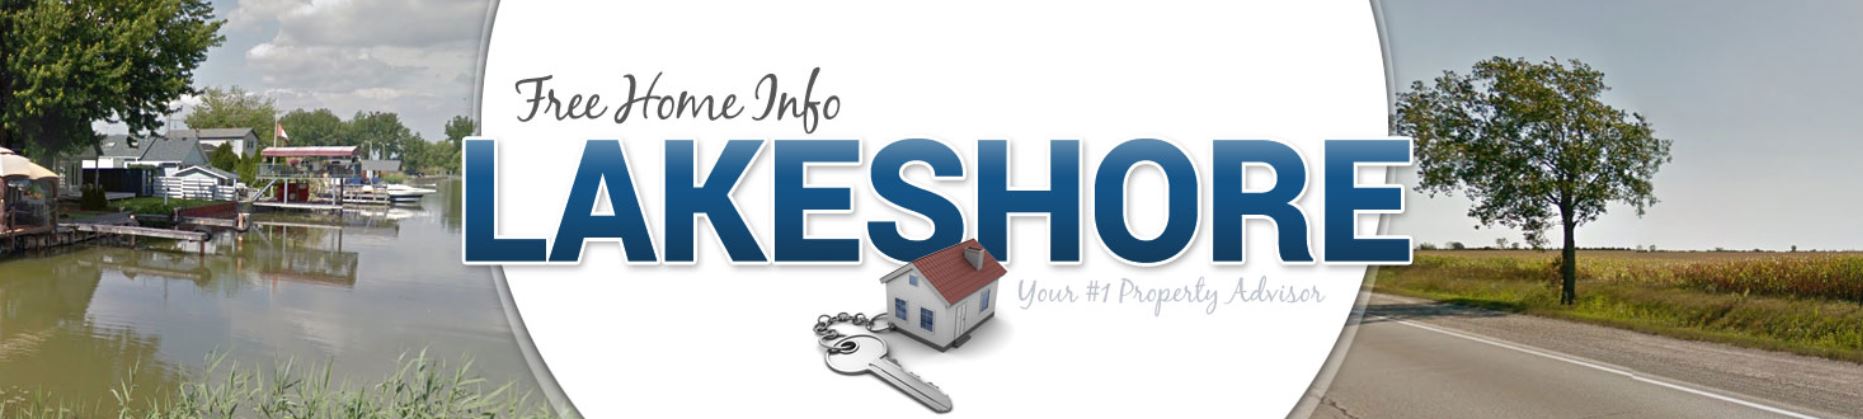 Discovering Lakeshore Ontario and it's Real Estate Market.  Important information and tips for Buyers and Sellers by real estate agent Ron Klingbyle specializing in Lakeshore Ontario real estate.  